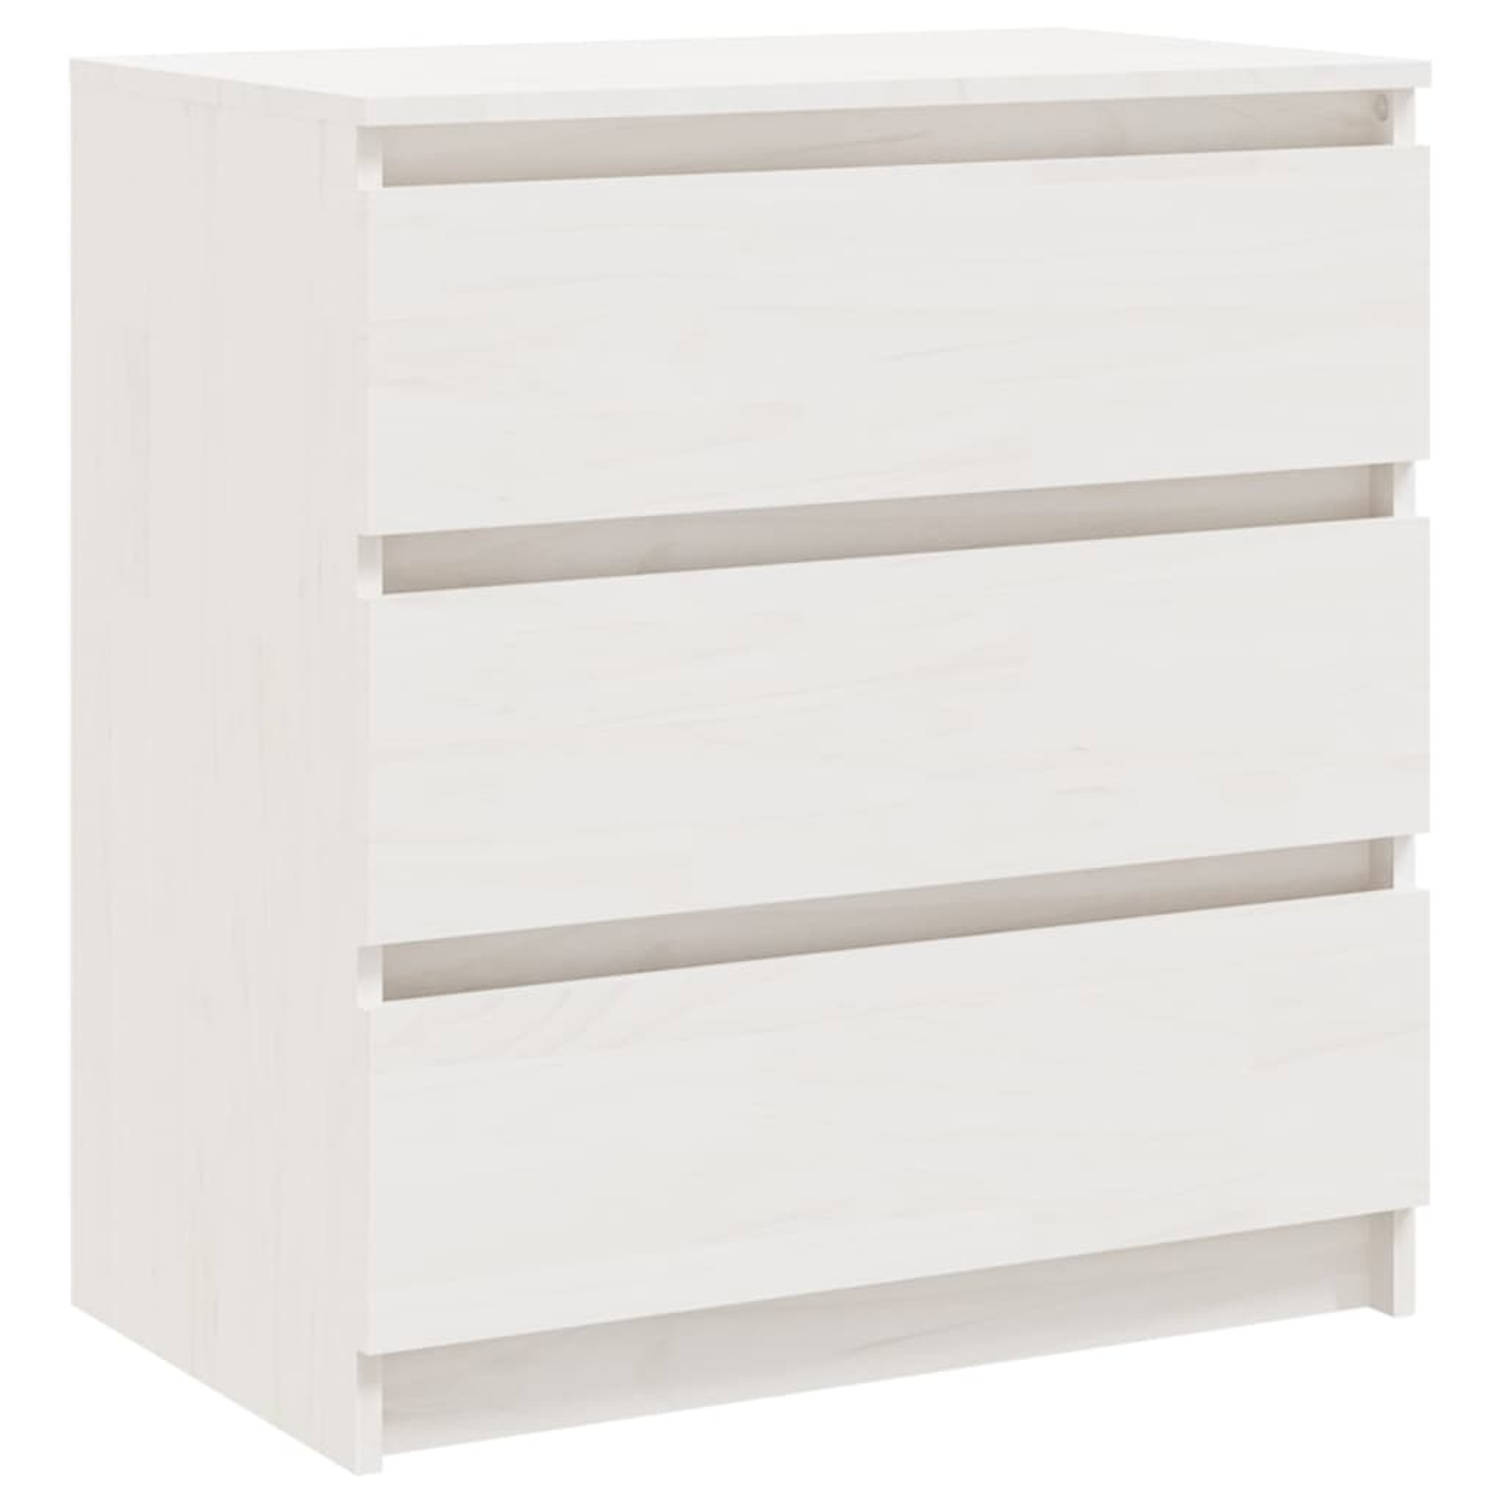 The Living Store Nachtkastje - Houten - wit - 60x36x64 cm - 3 lades